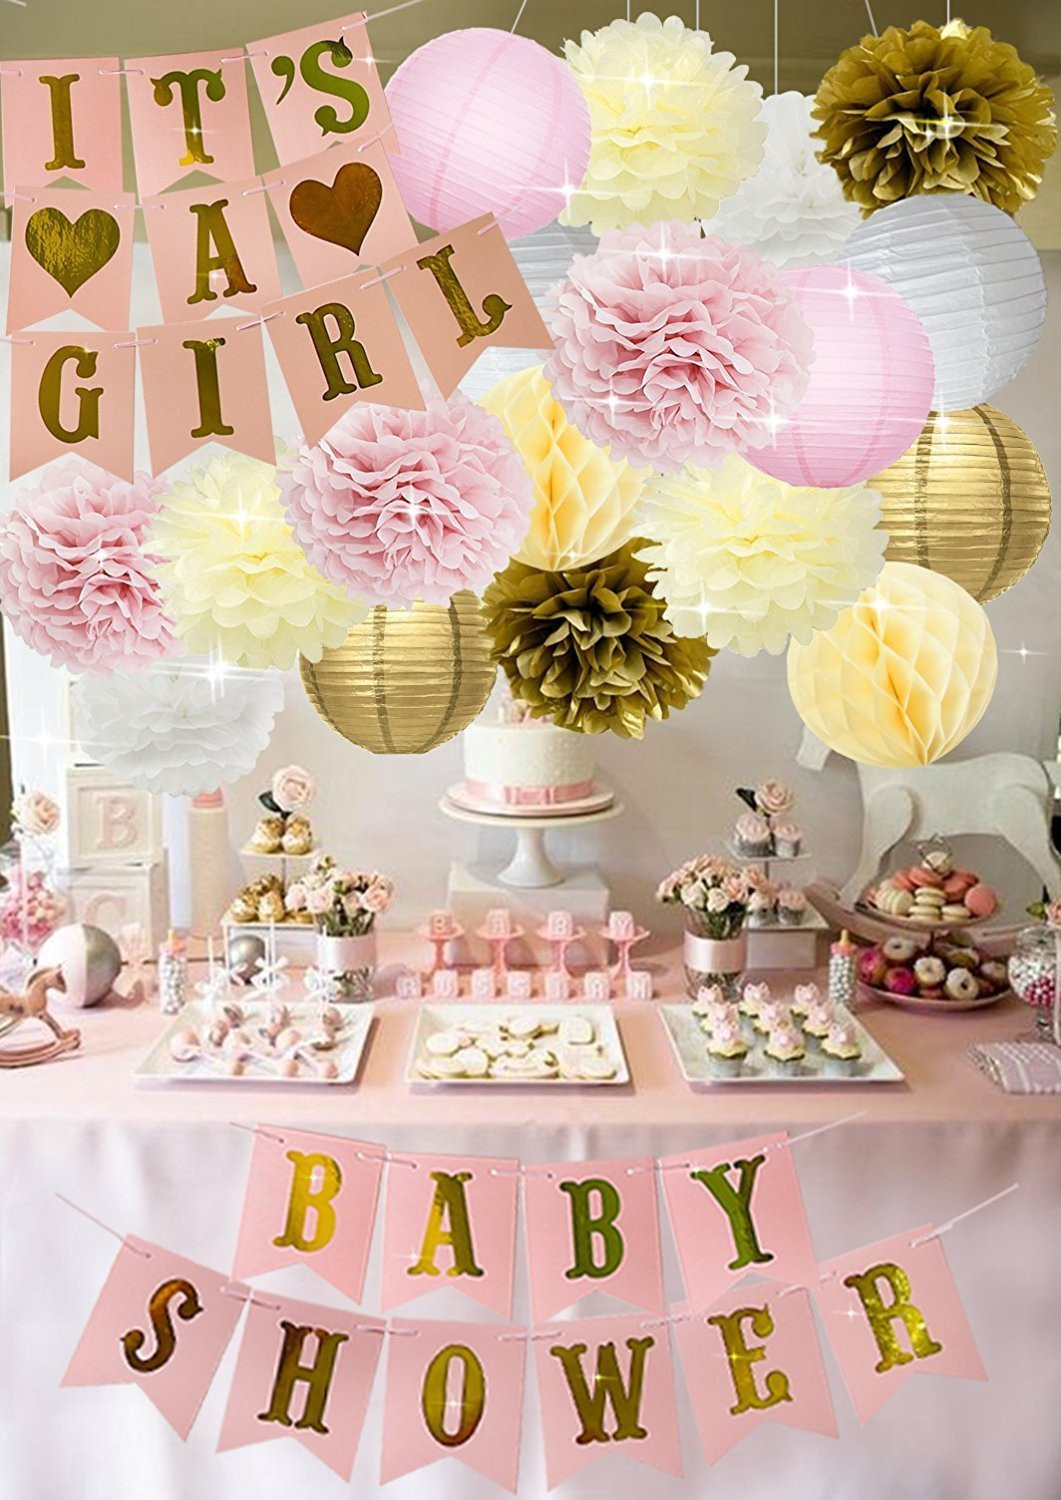 Baby Shower Wall Decorations Ideas
 Amazon Baby Shower Party Decorations Decoration Decor